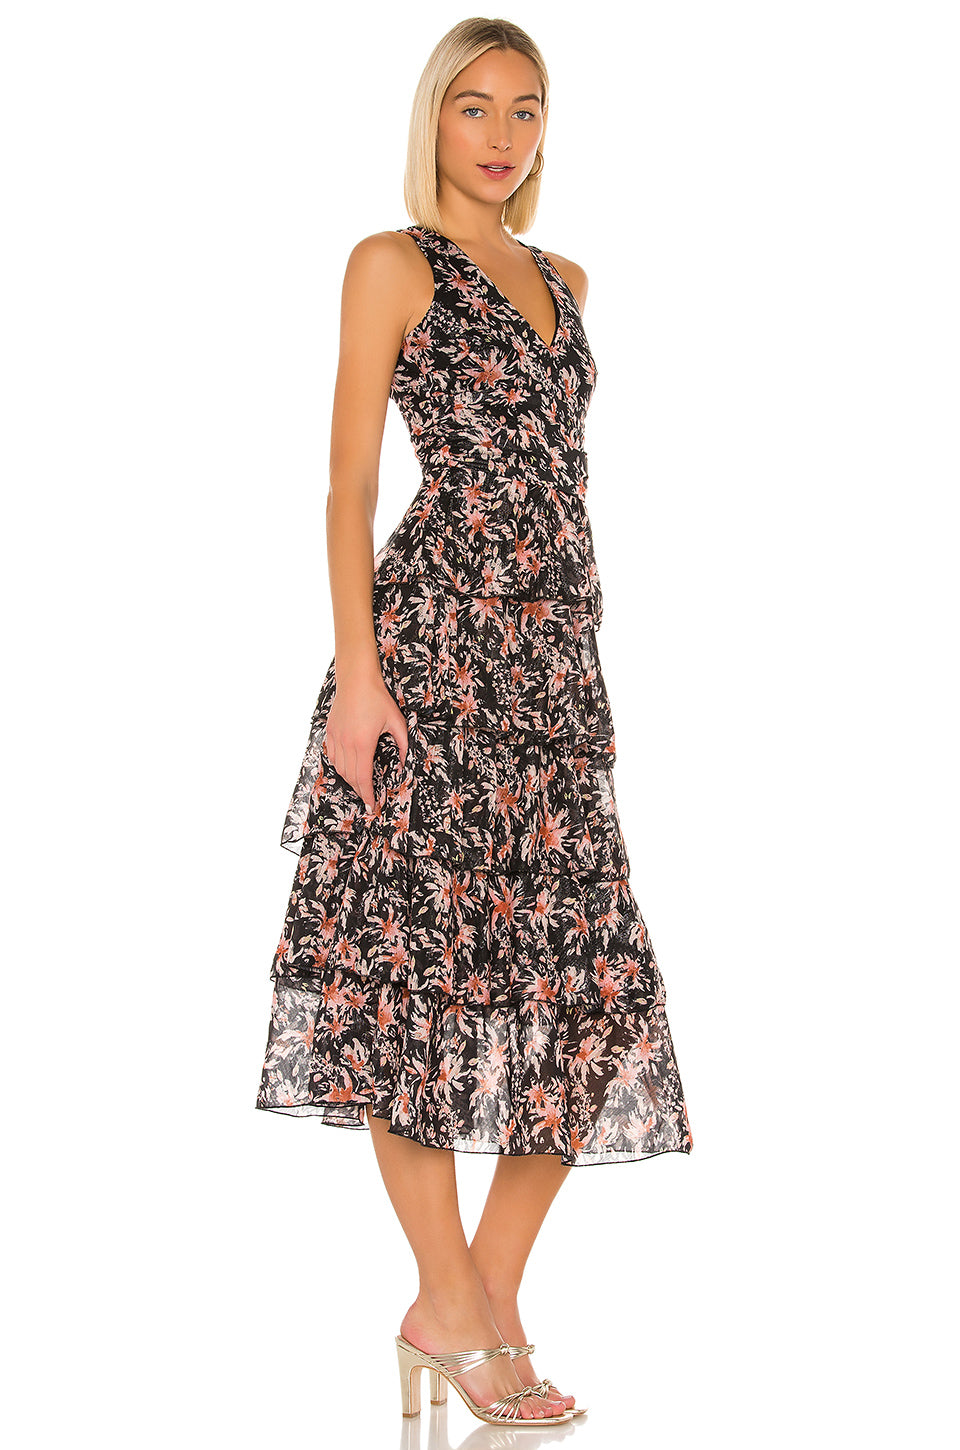 Kyra Dress in EVENING BERRY FLORAL